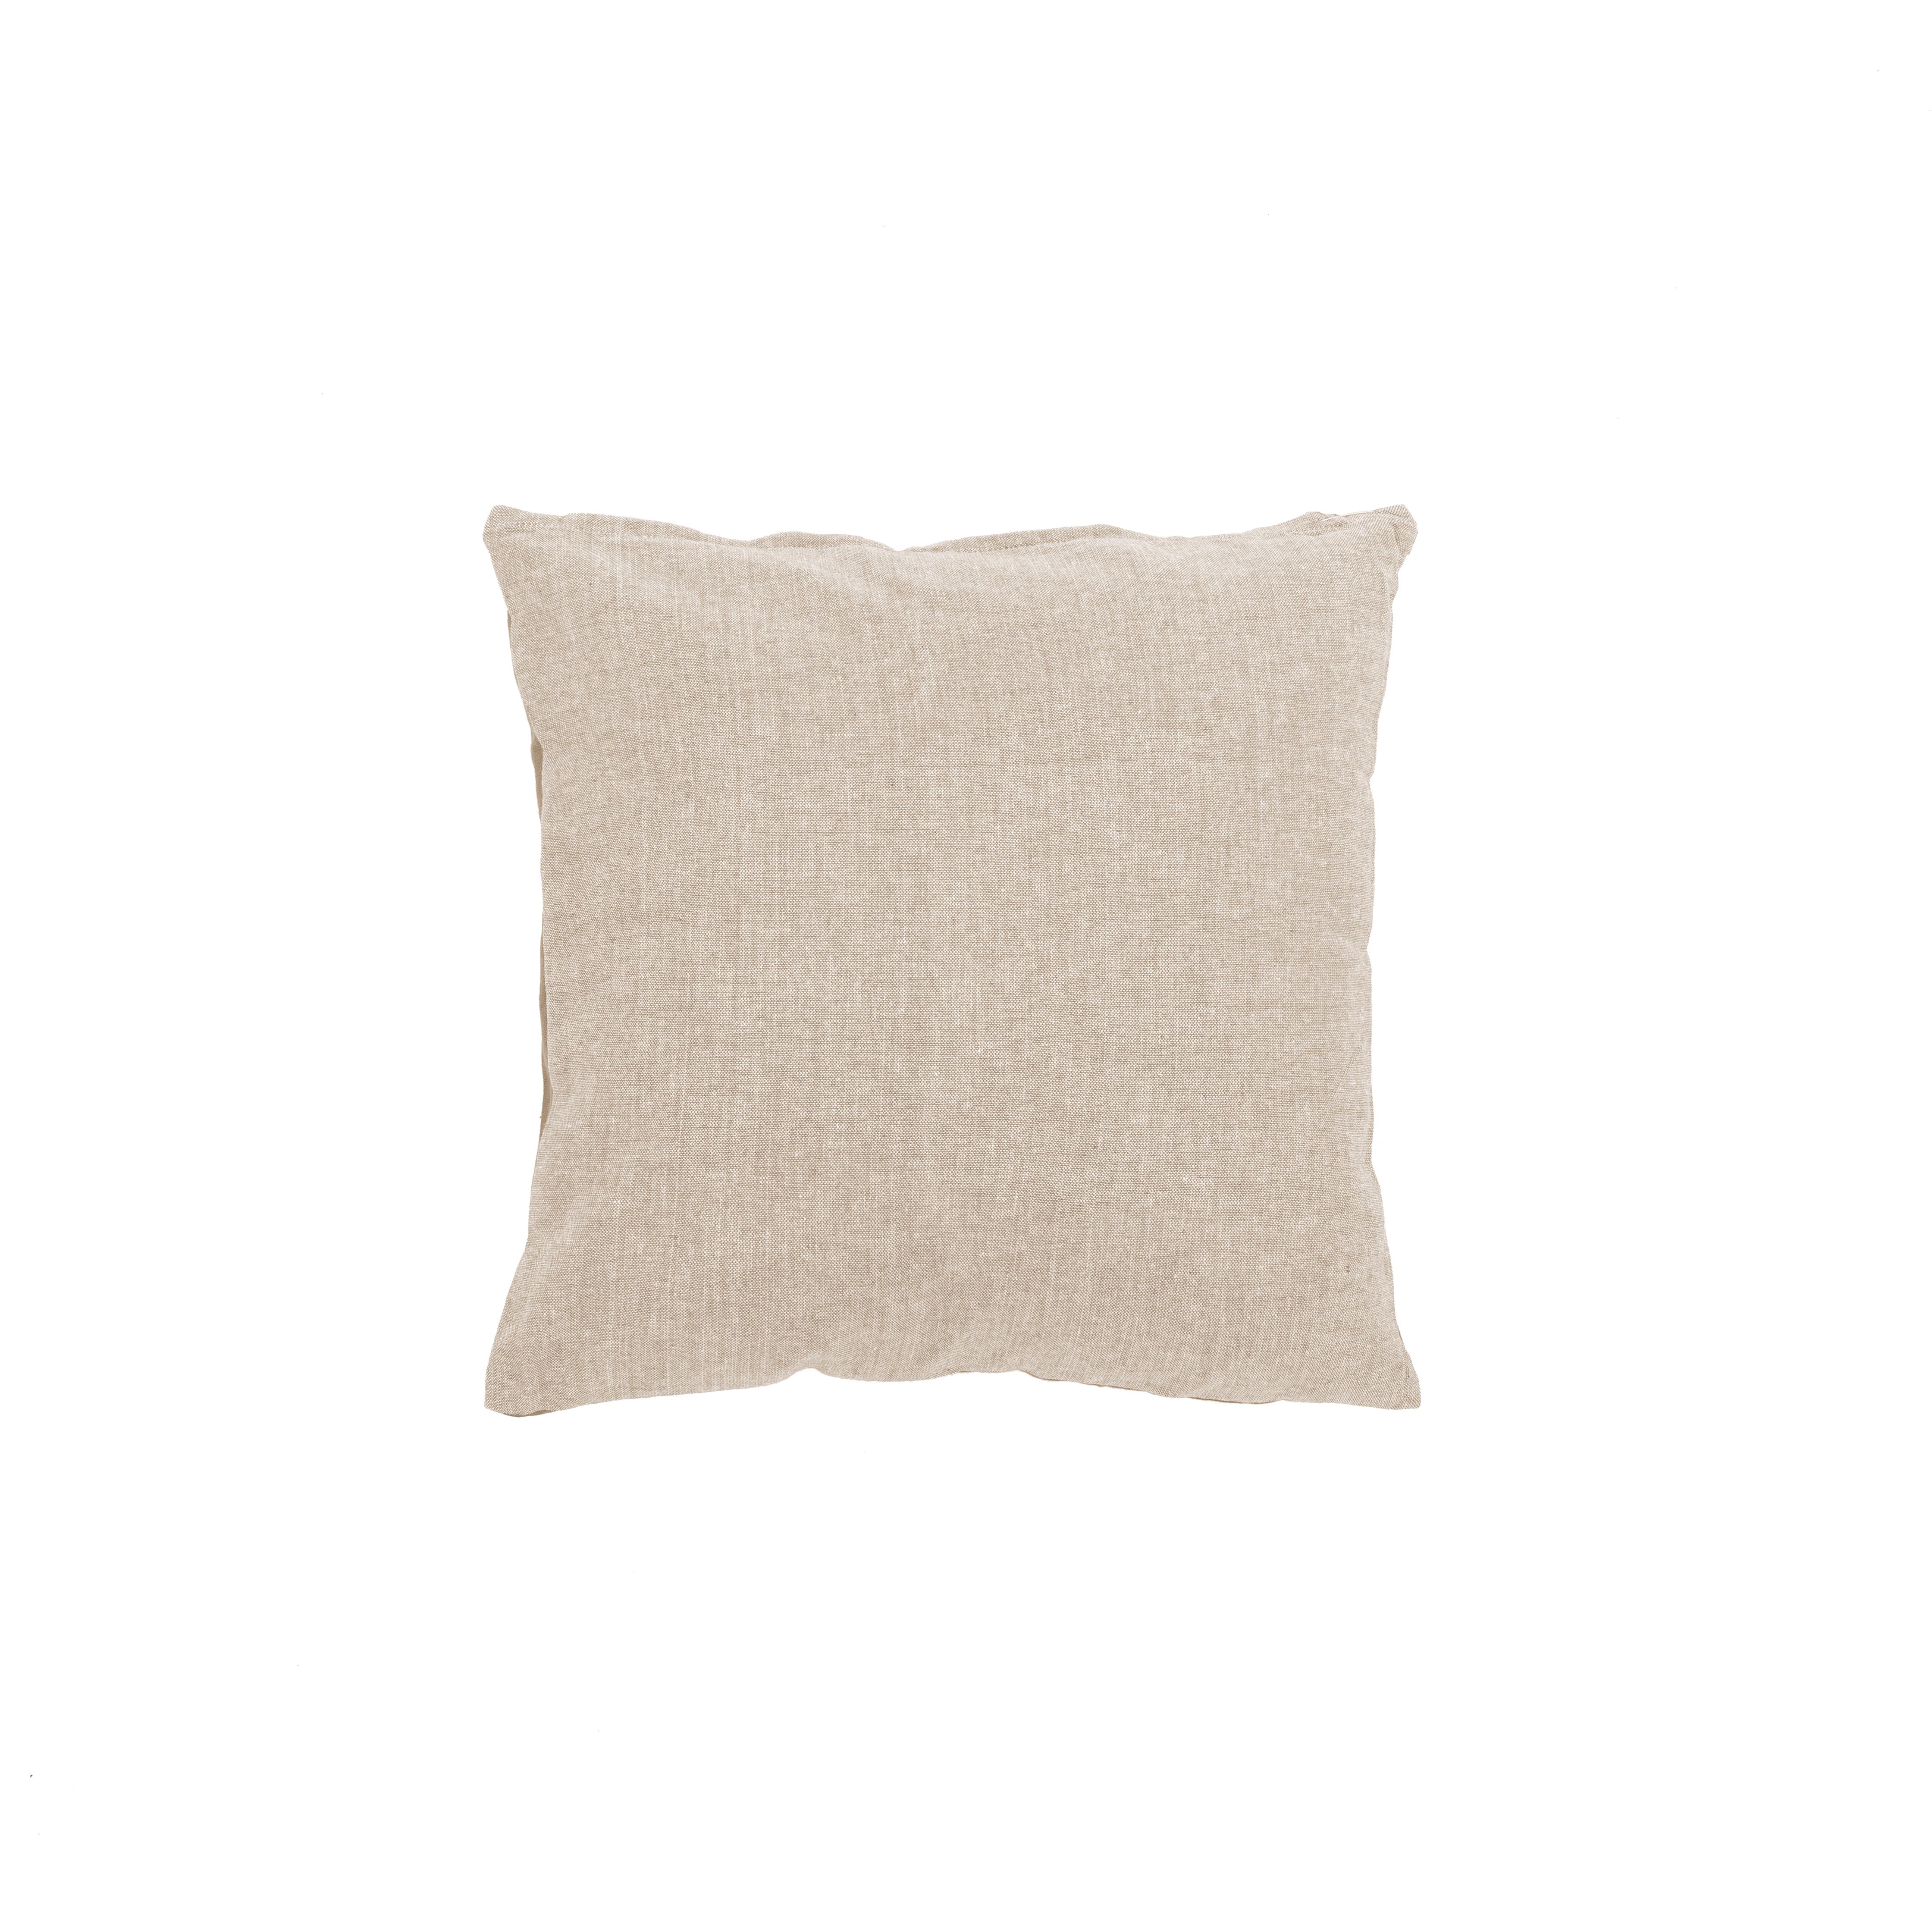 Kussen (gevuld) CHAMBRAY - 42x42cm, taupe